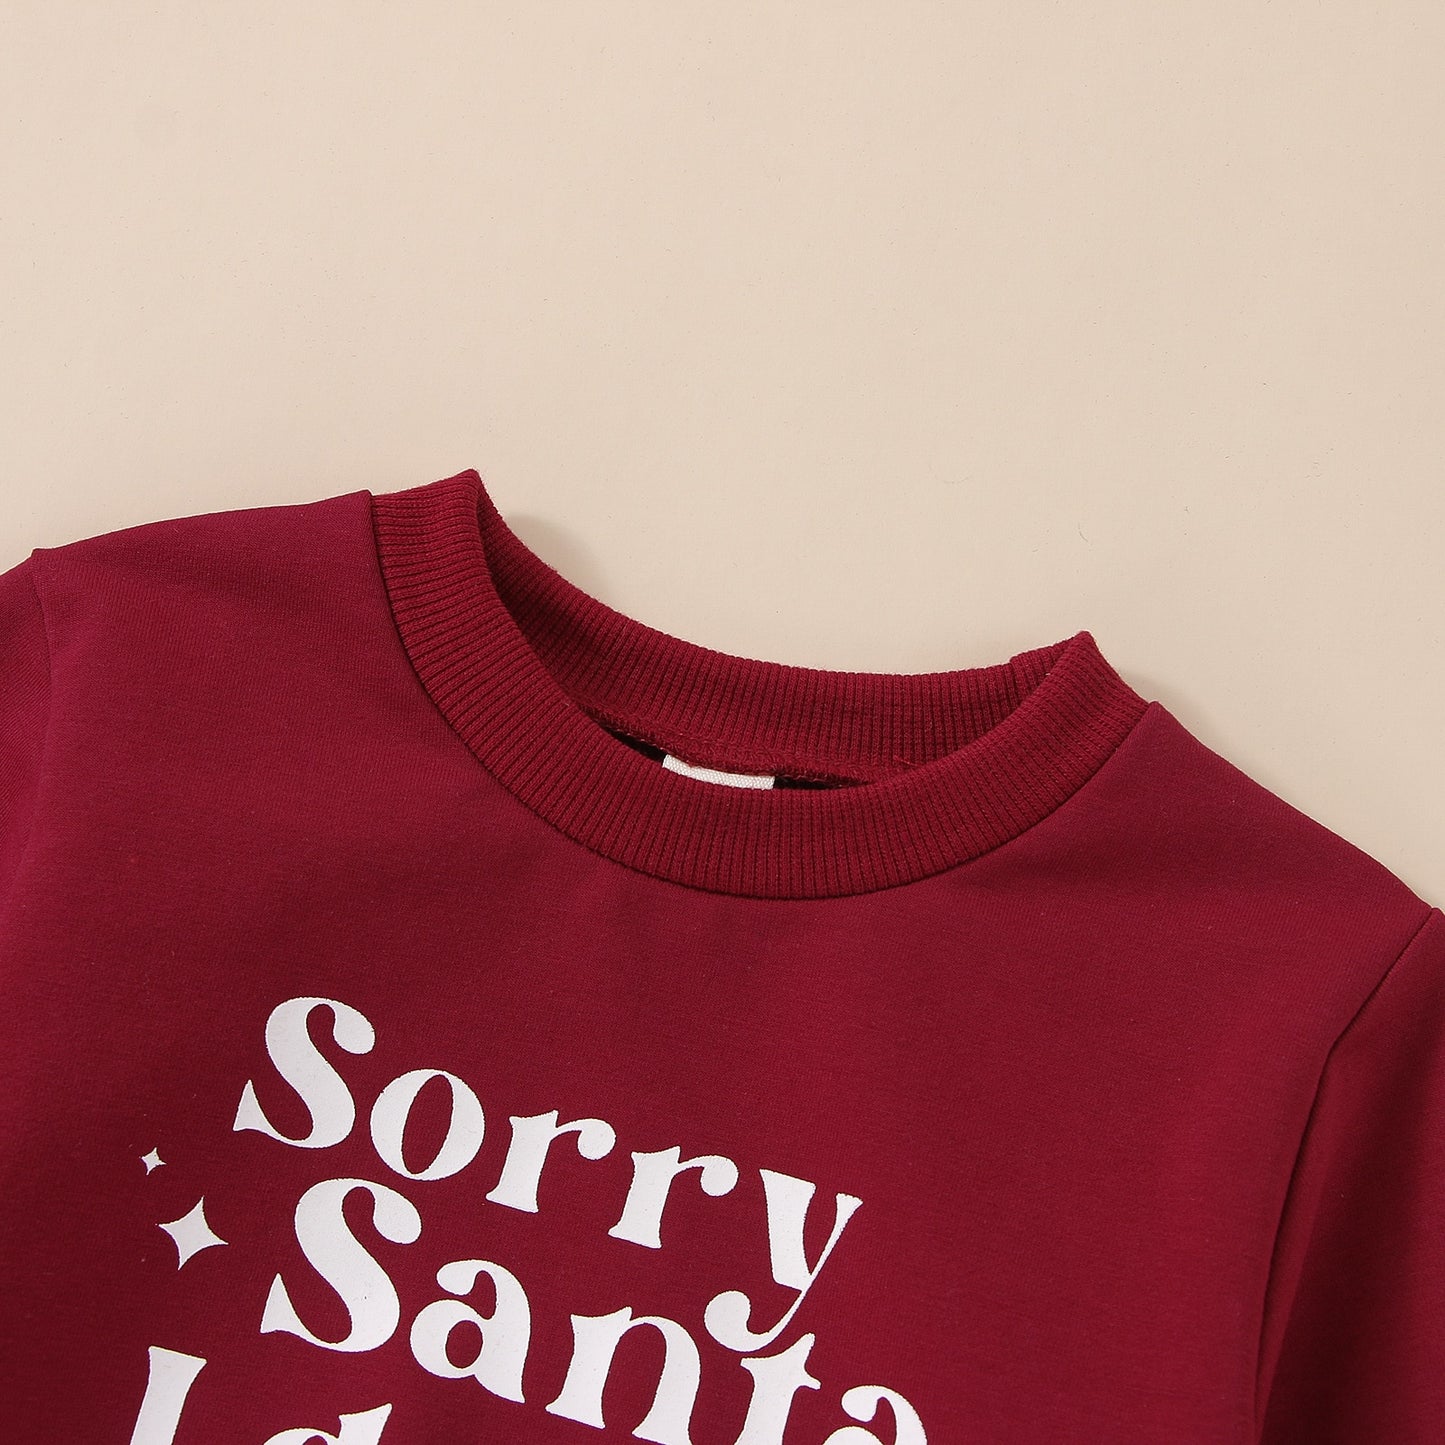 2022-10-17 Lioraitiin 0-24M Infant Baby Girl Autumn Sweatshirts Long Sleeve Red Sorry Santa I Drank The Milk Letter Printed Top